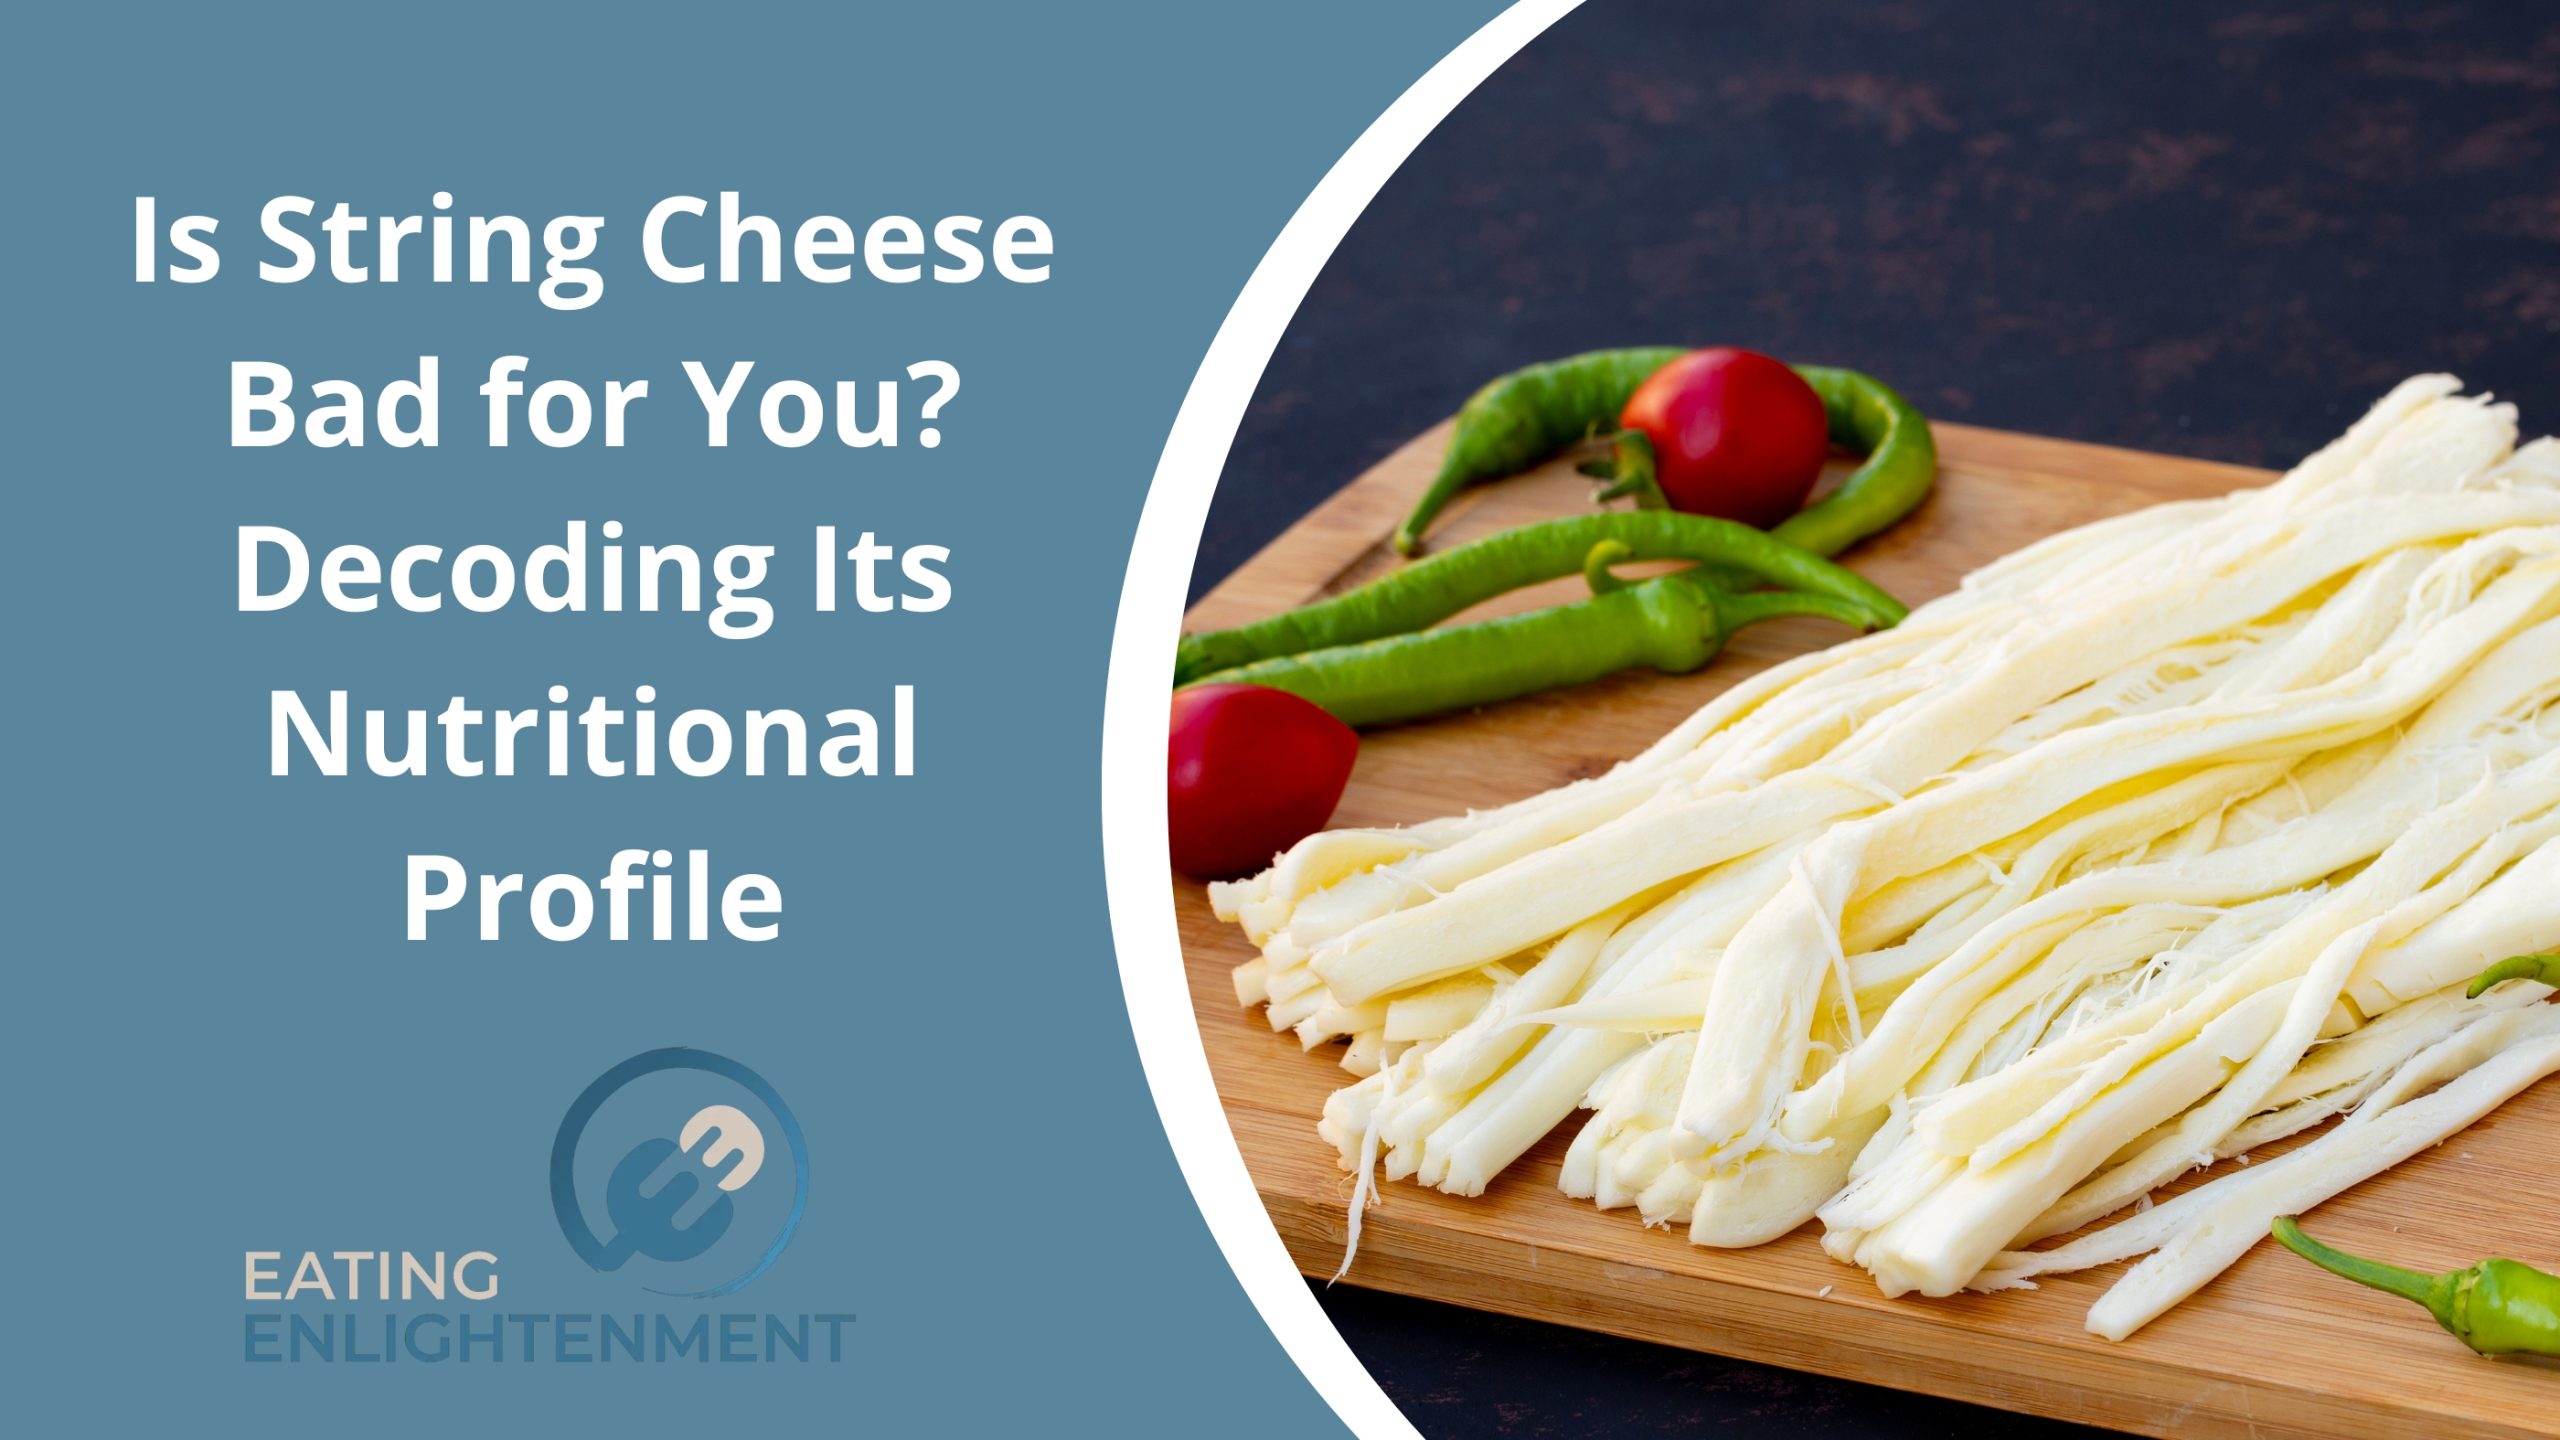 Is String Cheese Bad for You? Decoding Its Nutritional Profile